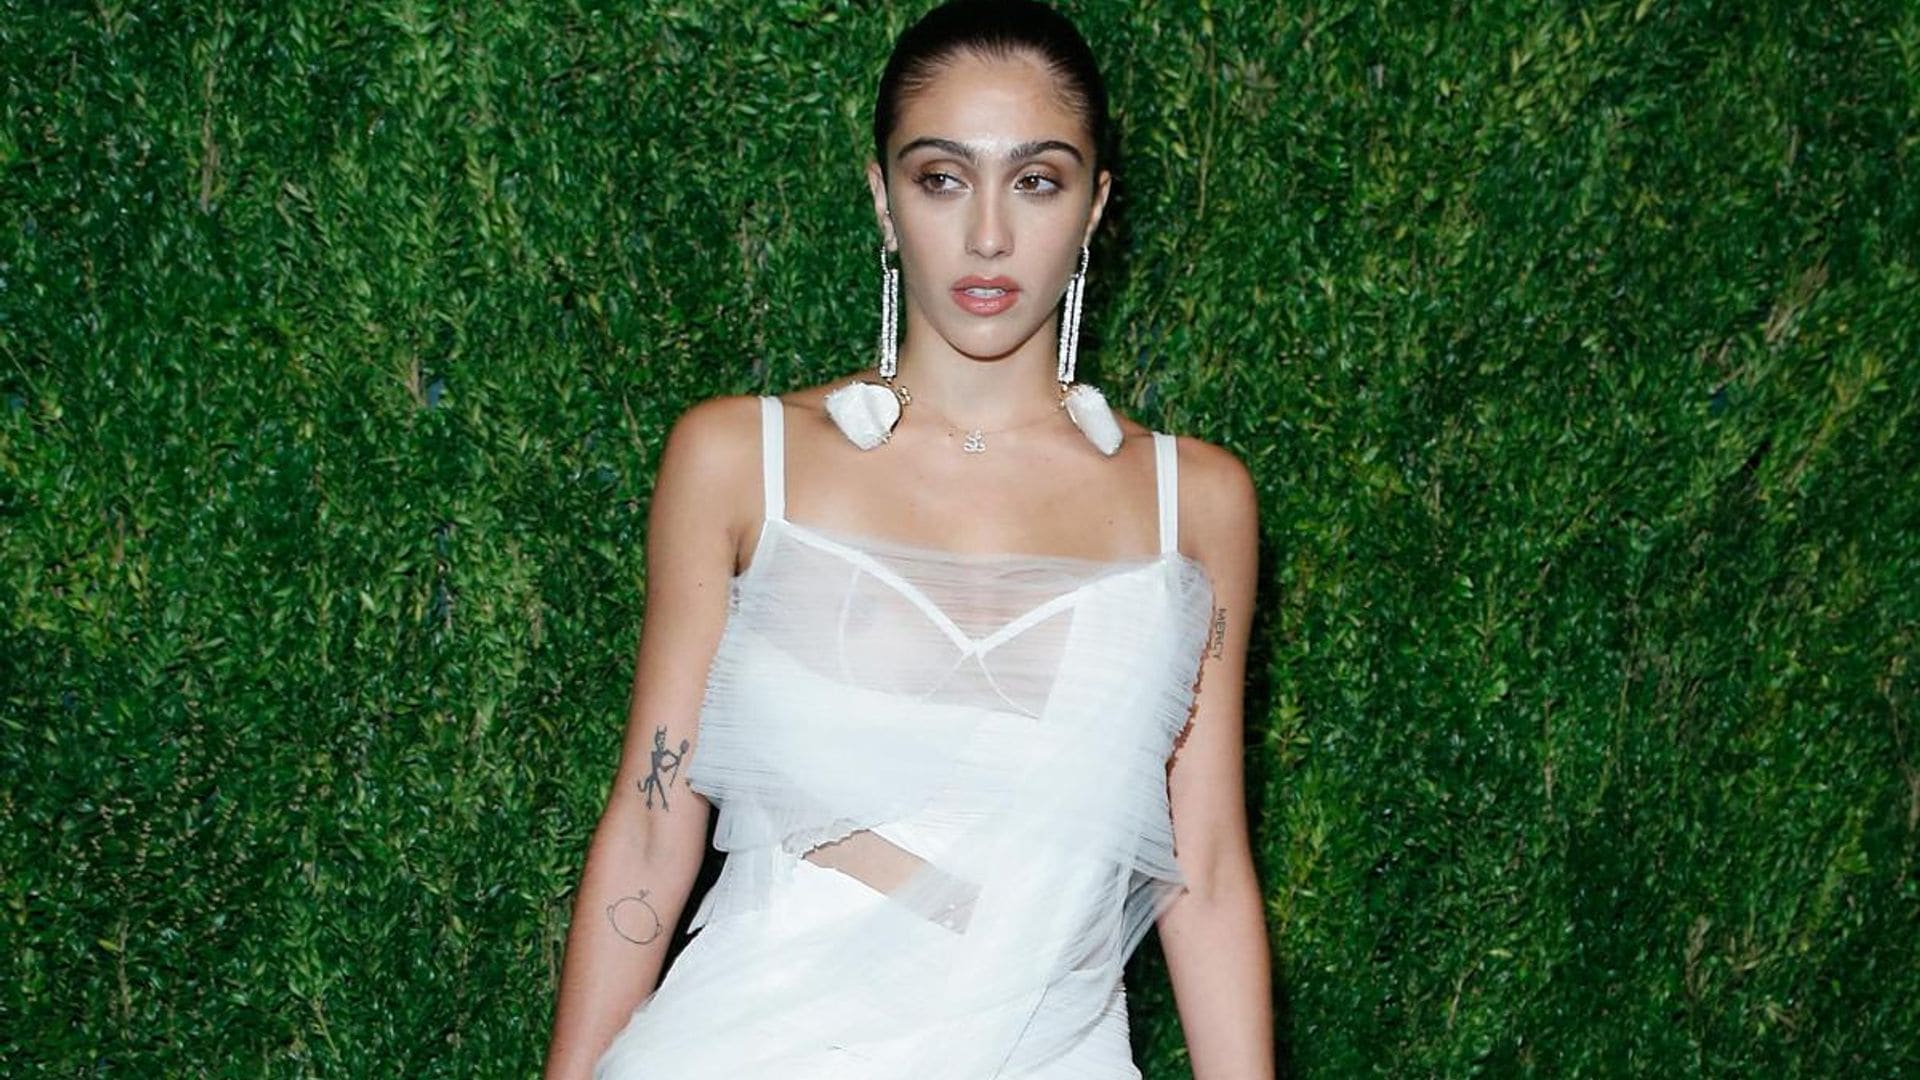 Madonna’s daughter Lourdes Leon is the new face of Juicy Couture’s underwear collection